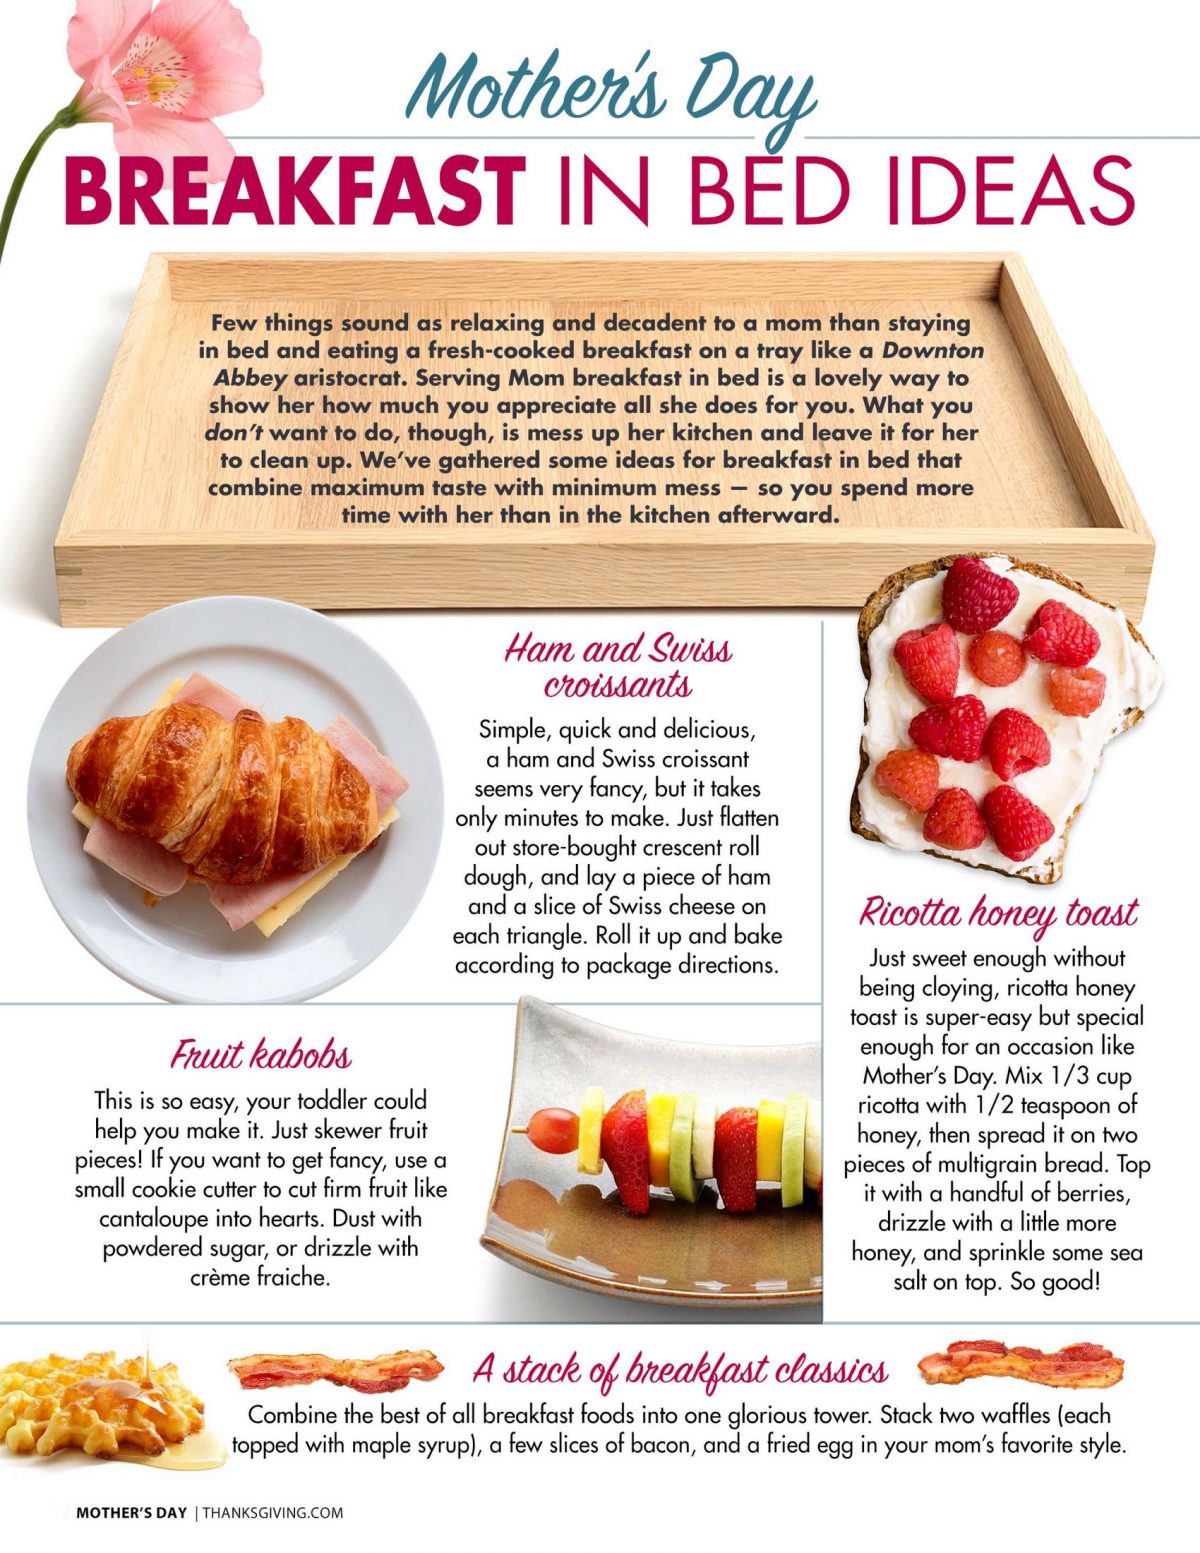 Mother's Day breakfast-in-bed ideas & recipes